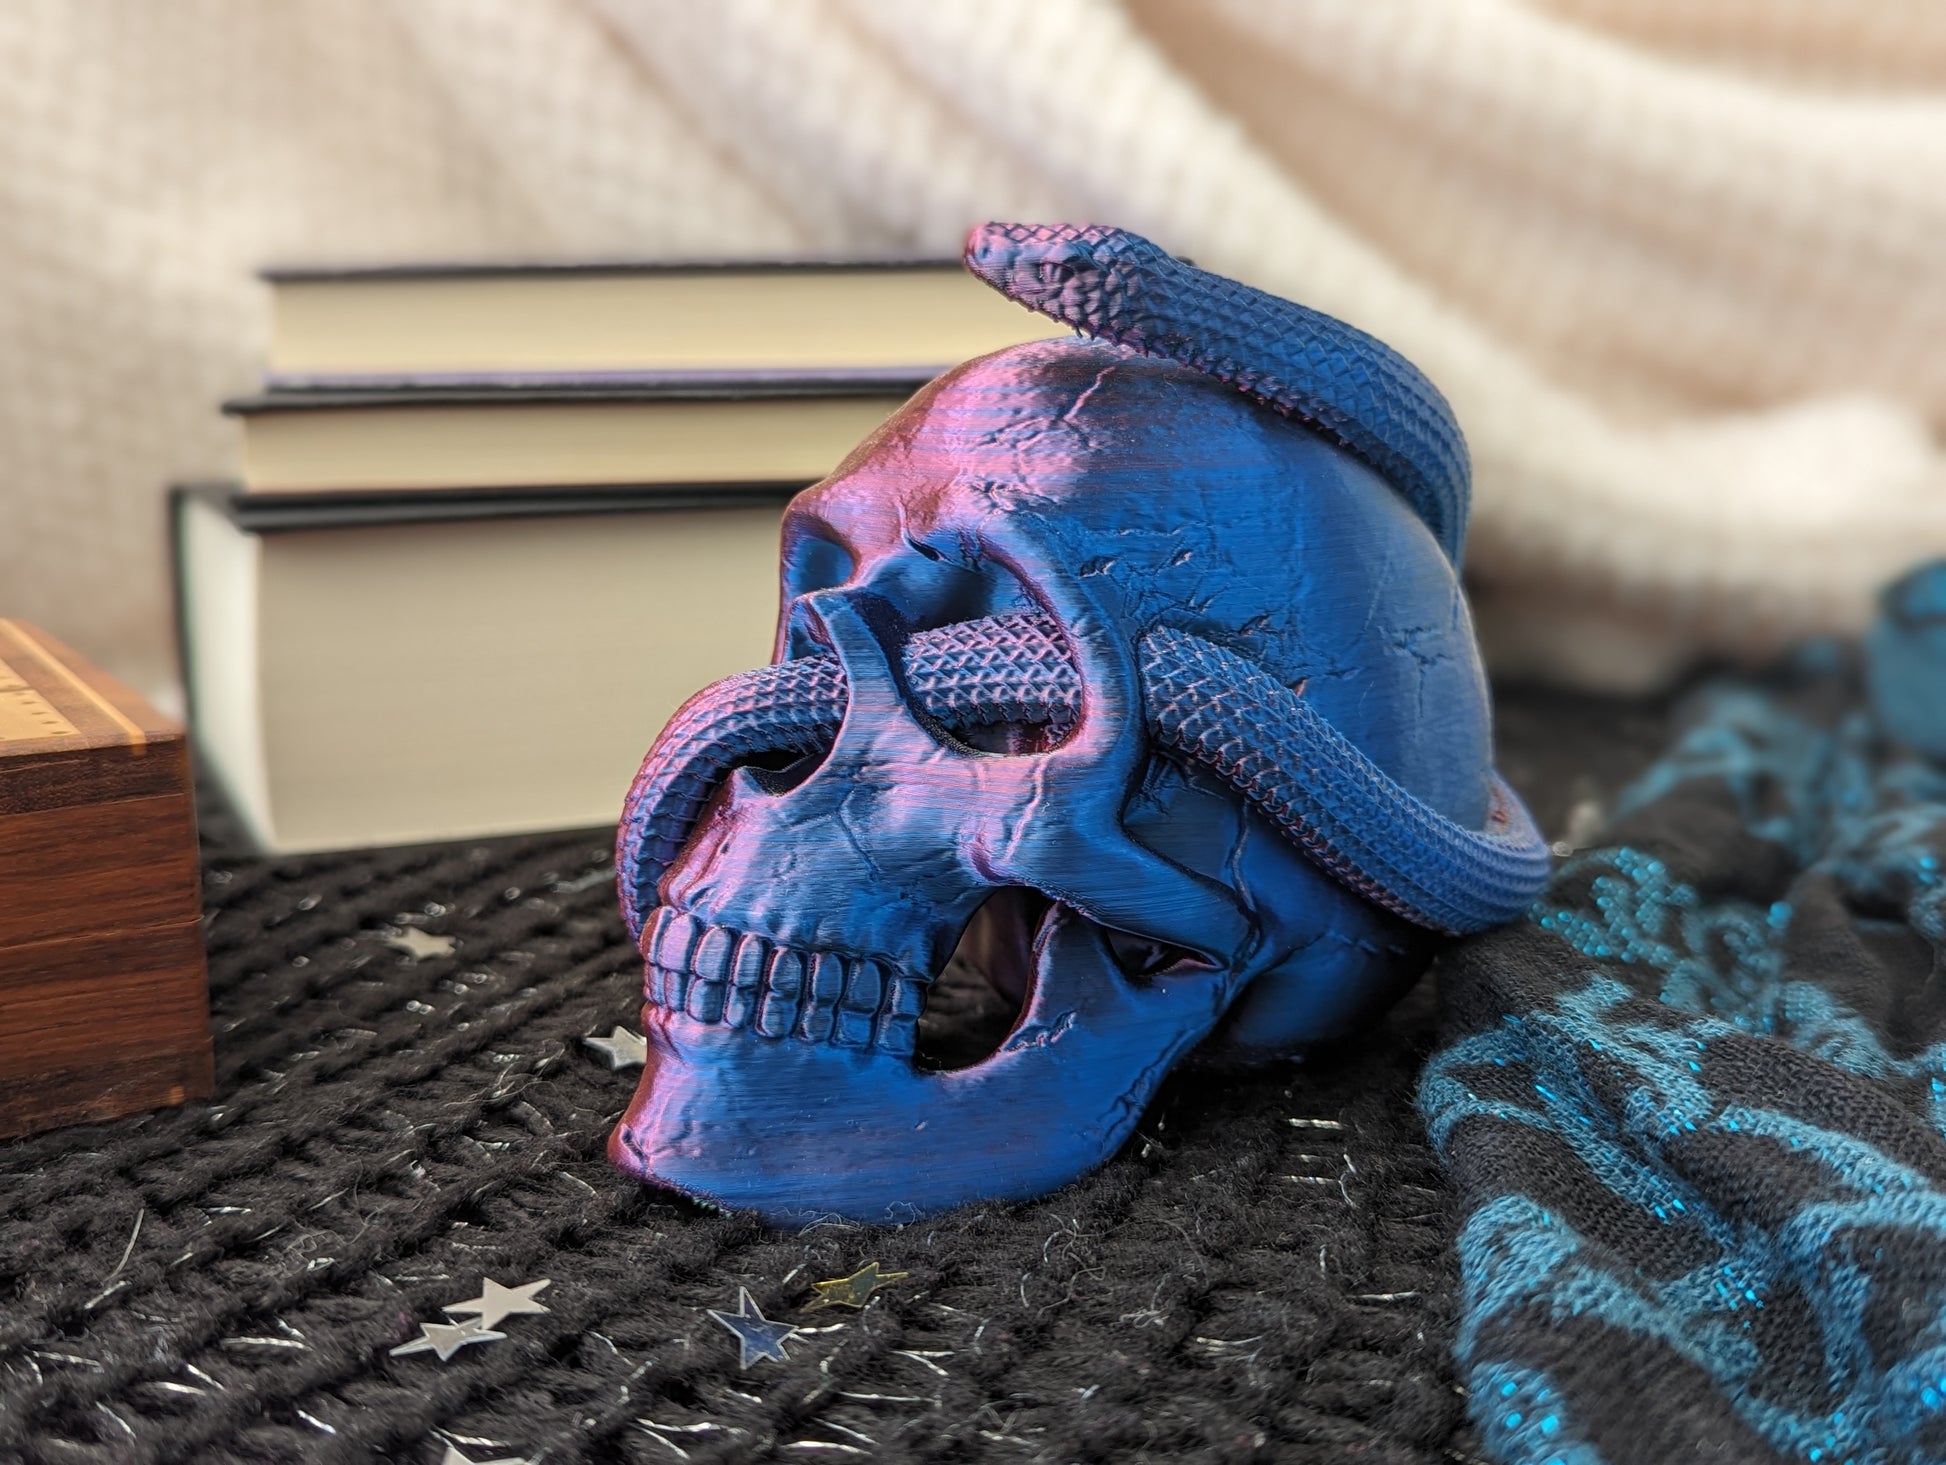 Skull ornament with entwined snake in pink and blue 2-tone